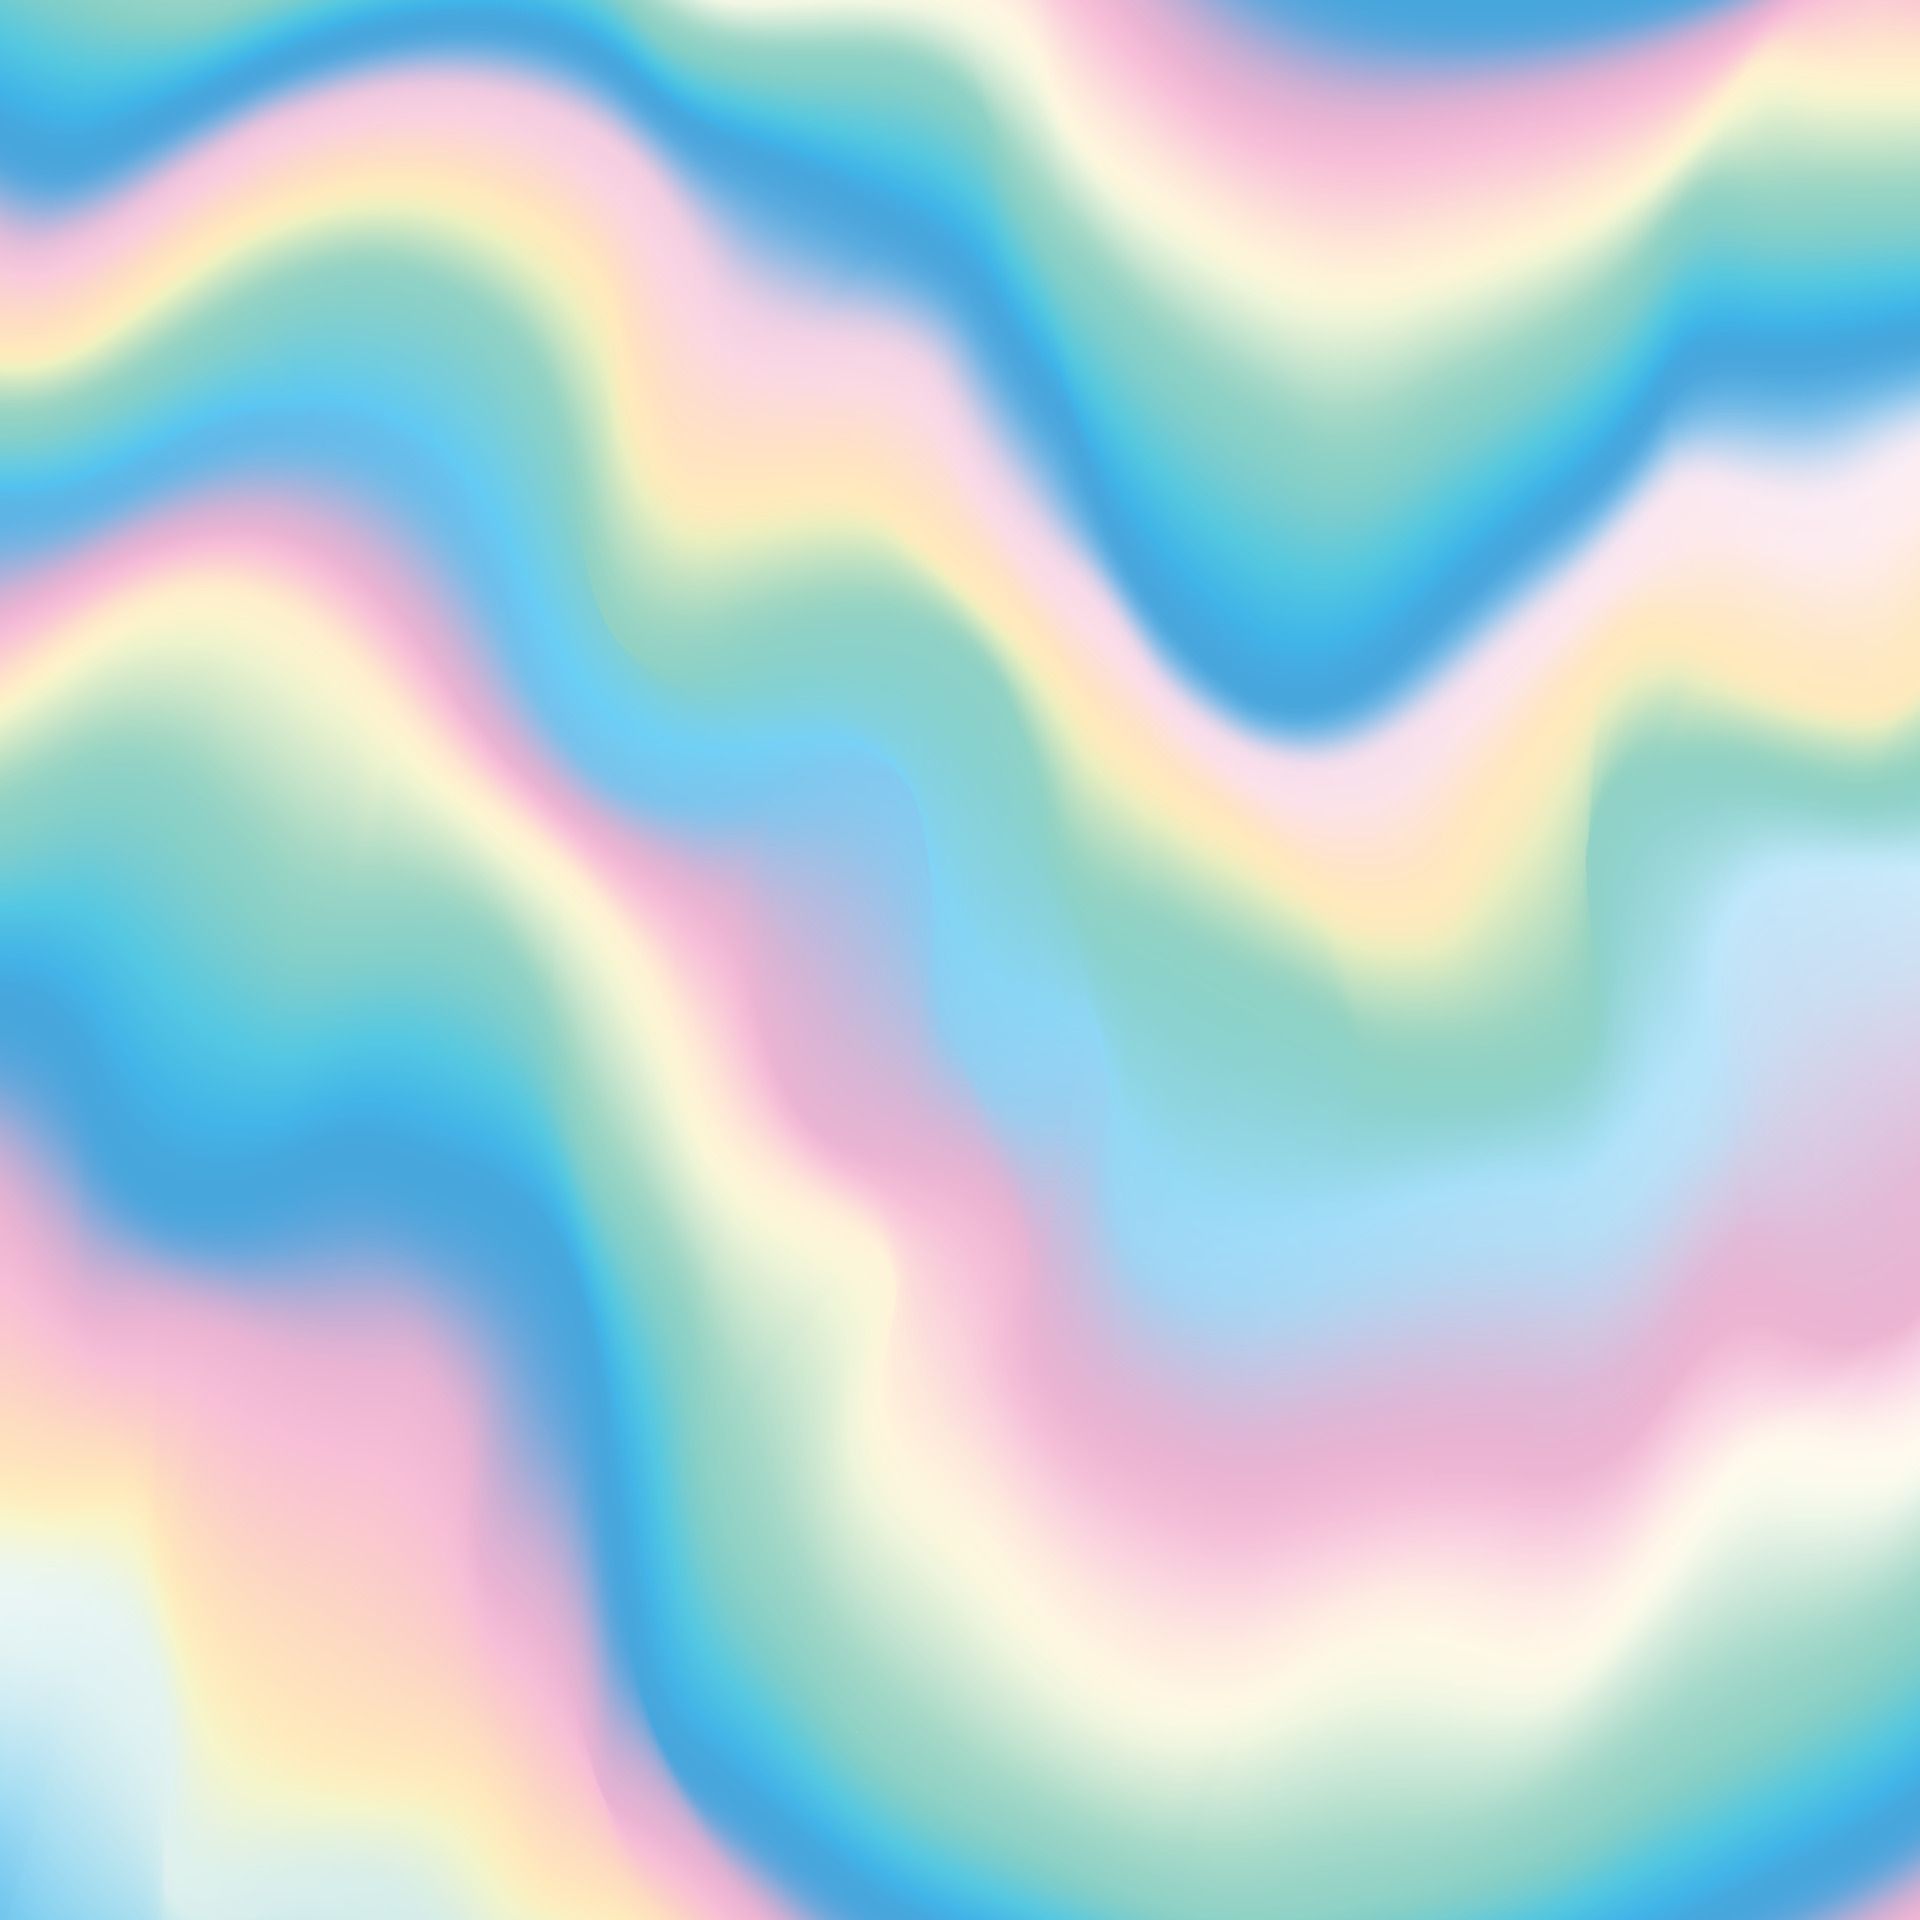 A pastel rainbow colored wallpaper with a wavy texture - Holographic